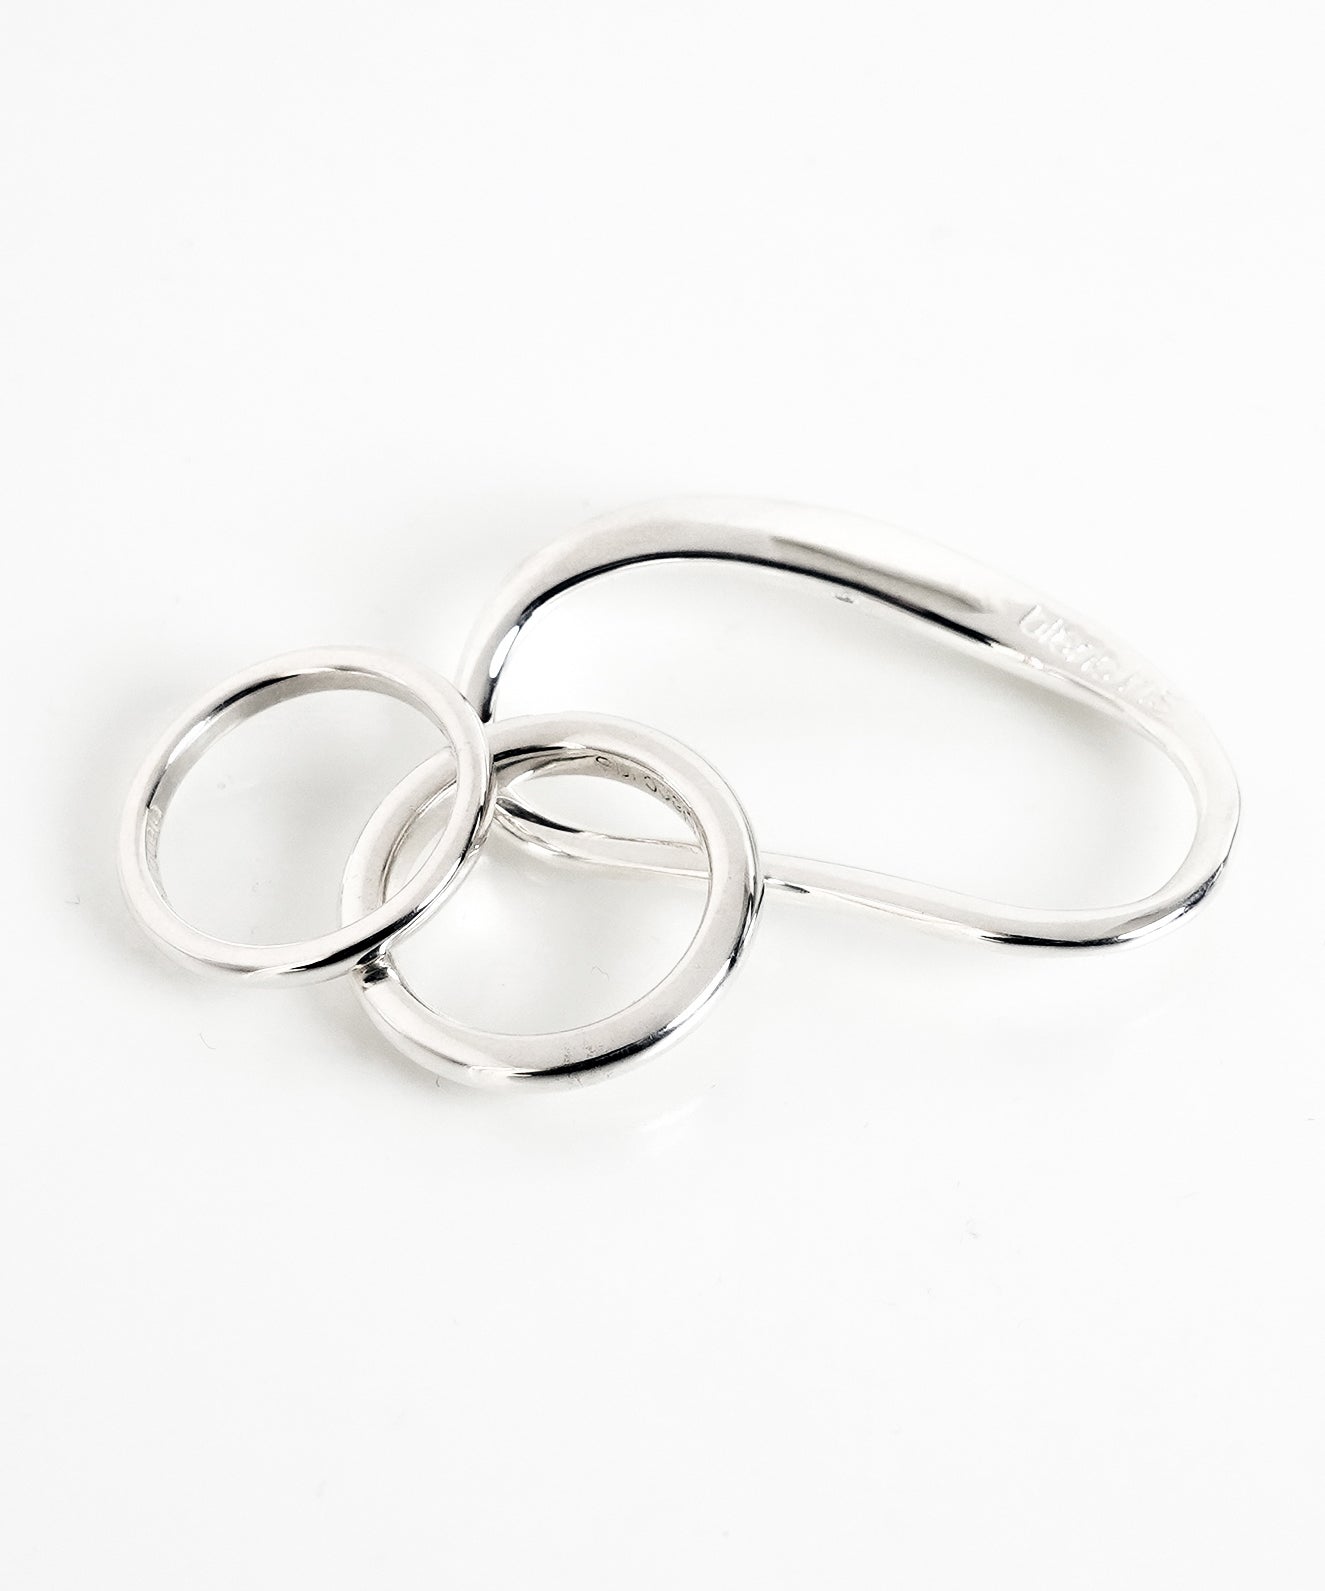 【BLANC IRIS/ ブランイリス】EVOLUTION COLLECTION STERLING SILVER RING / リング